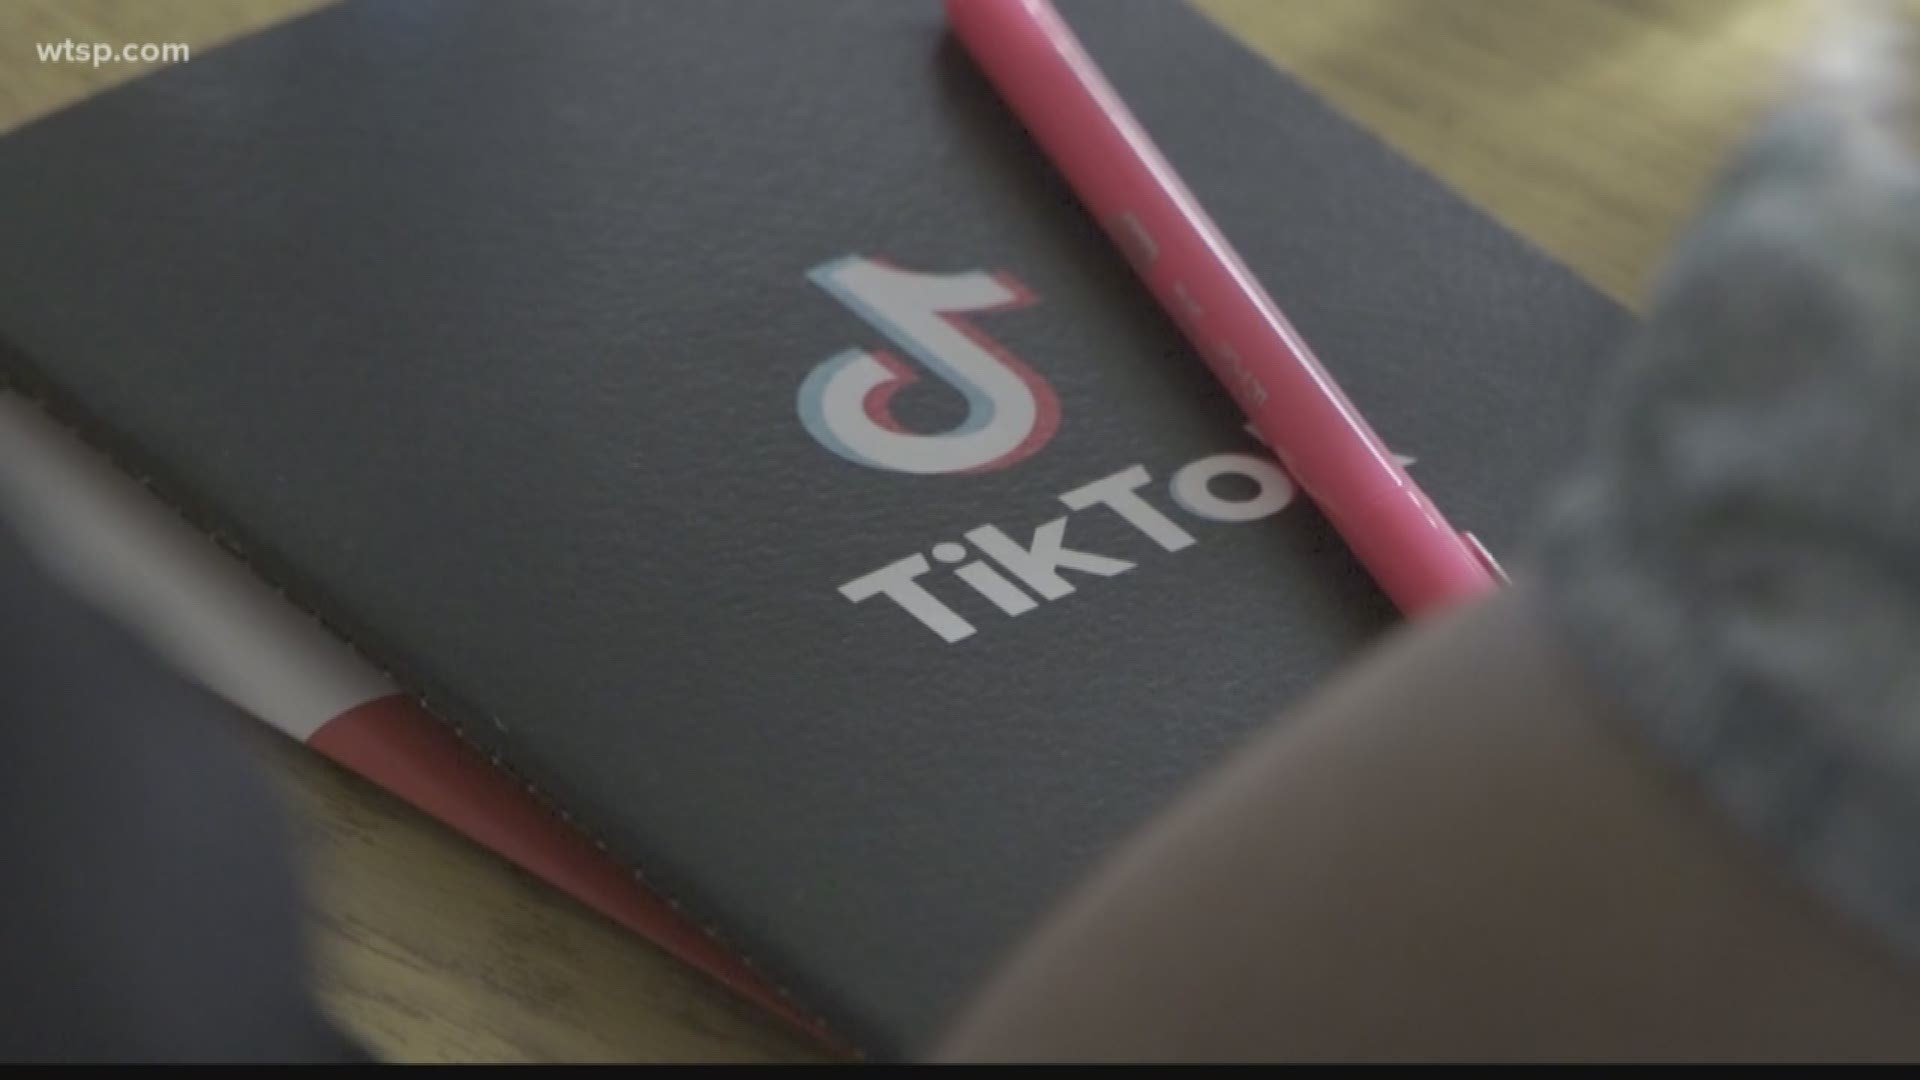 If you have teenager, then odds are you are probably familiar with the app TikTok...or have at least heard of it.